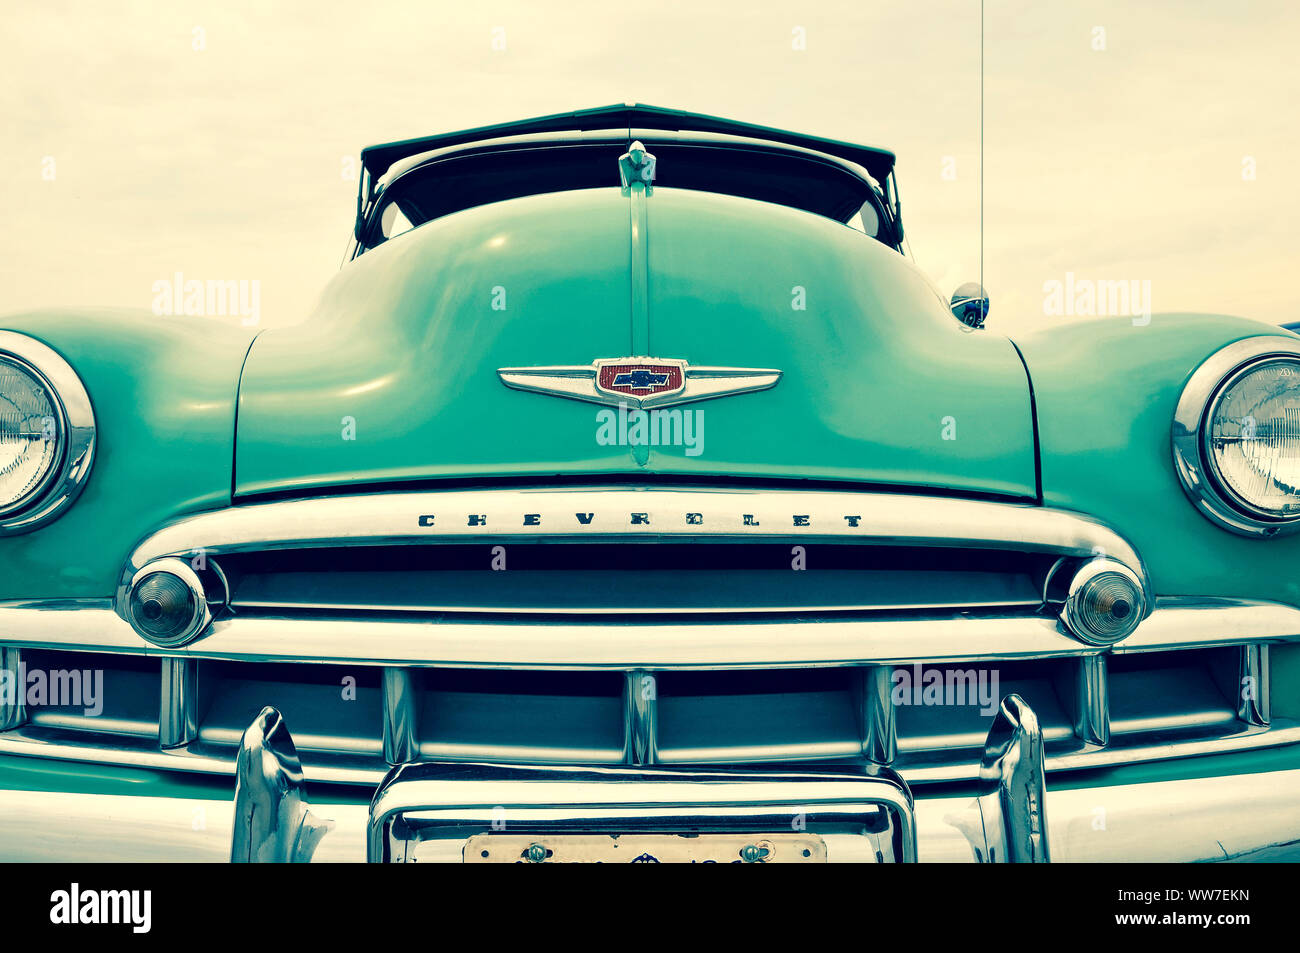 An image of classic, teal colored 1949 Chevrolet Fleetline vintage car. Stock Photo